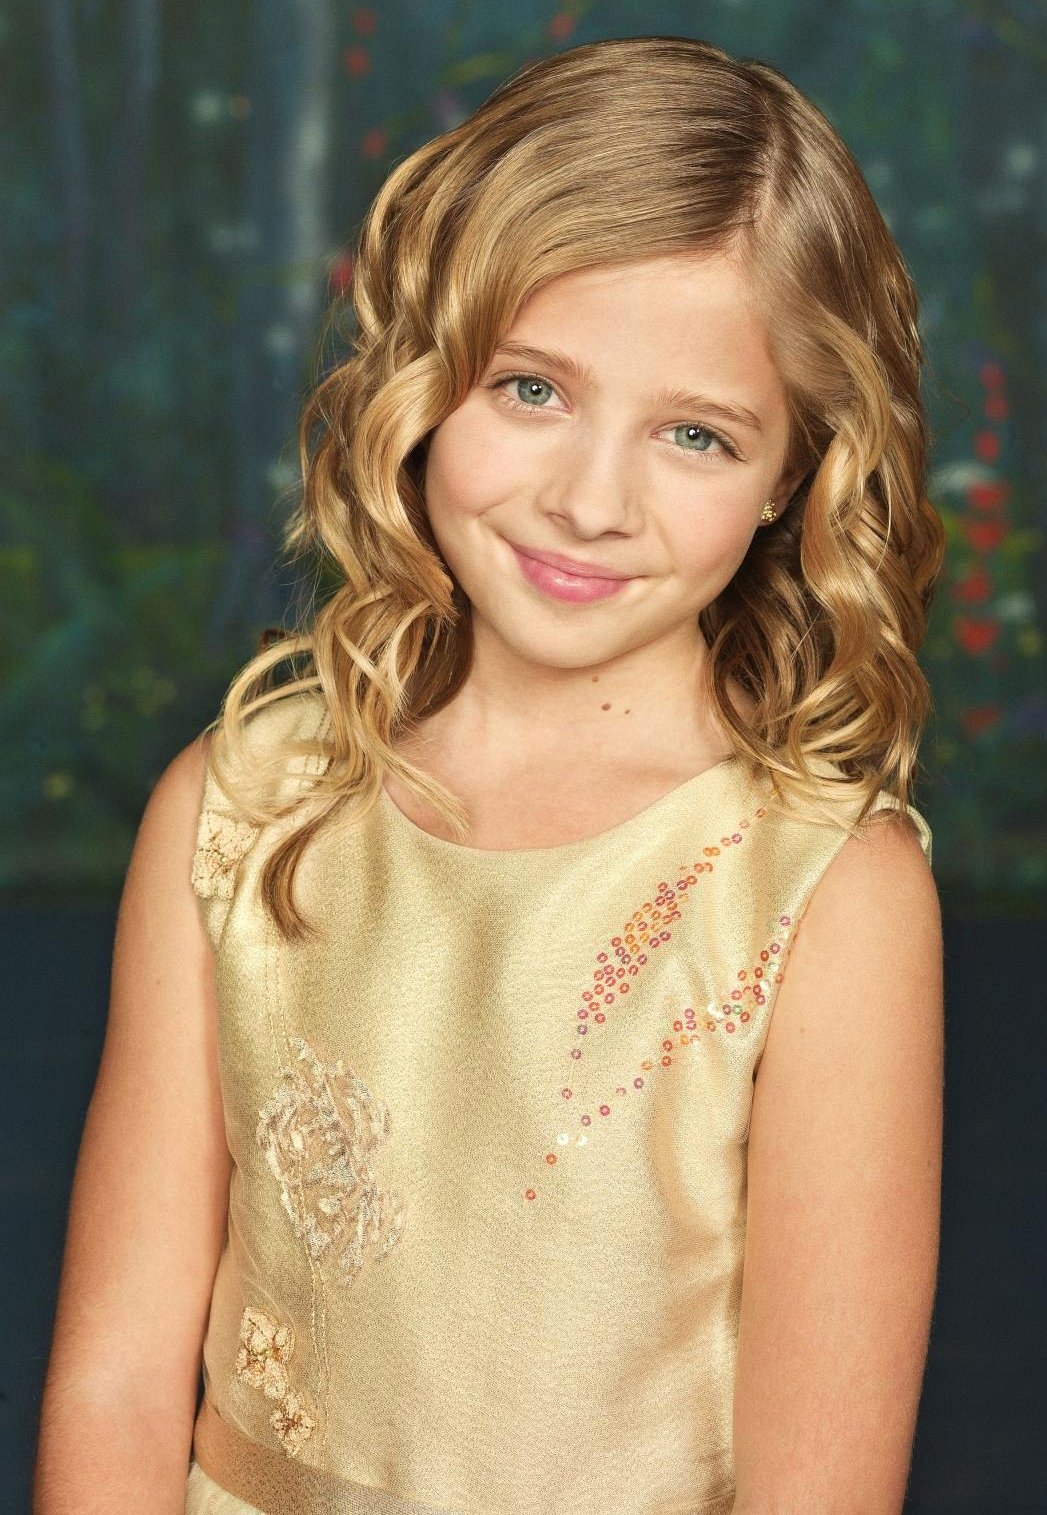 When You Wish Upon A Star │ Jackie Evancho.